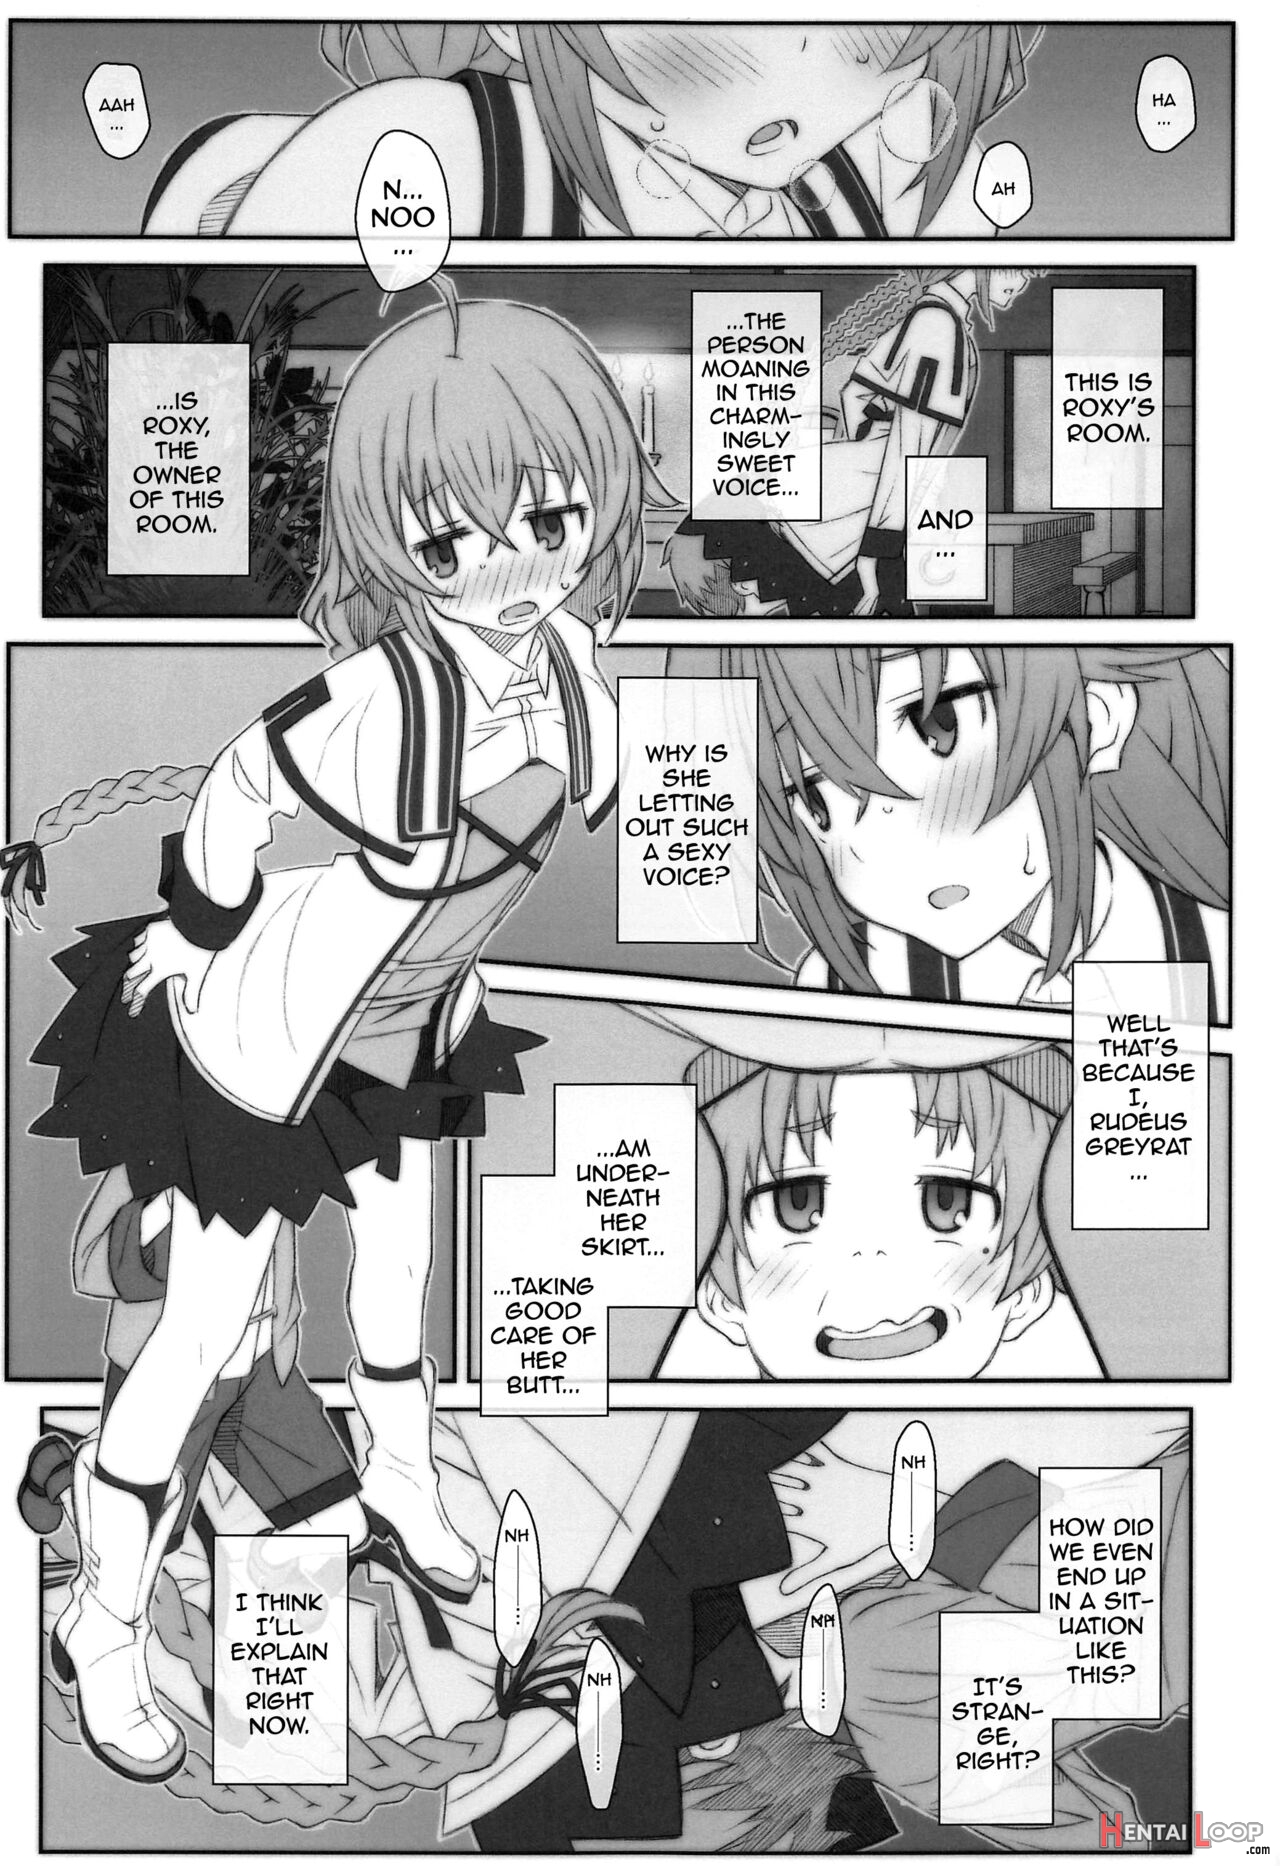 Type-63a page 2